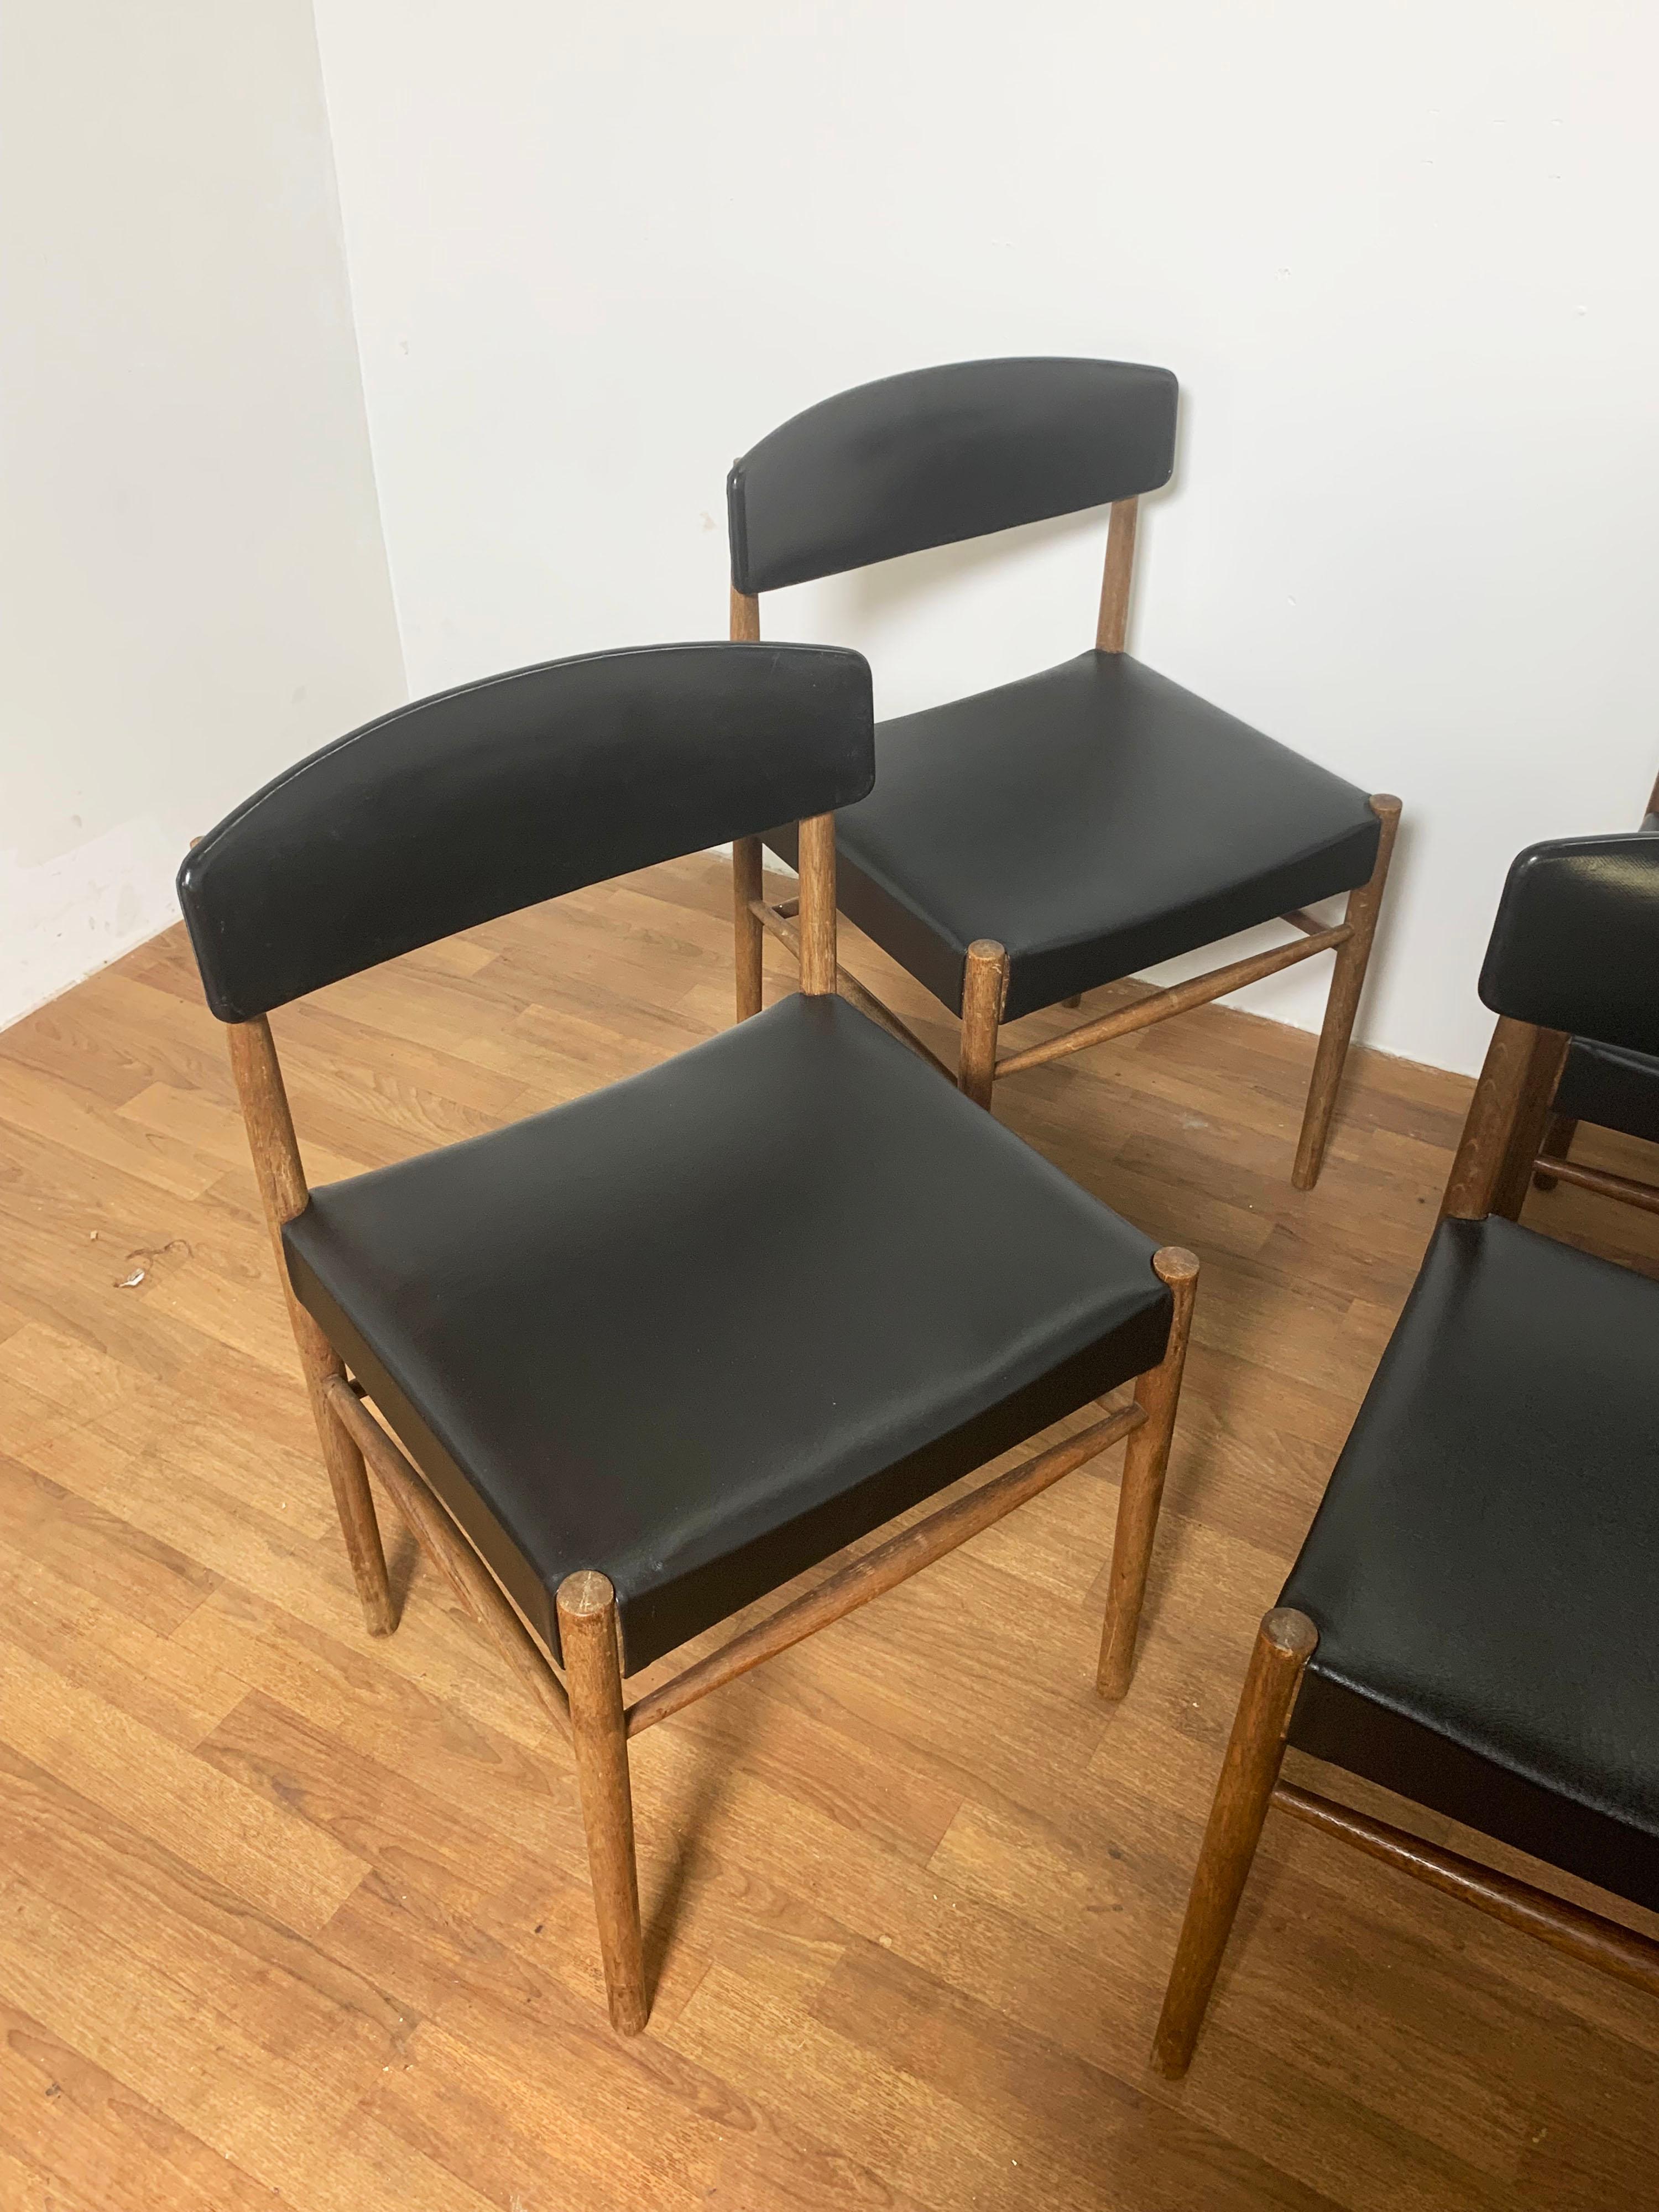 Set of six Danish dining chairs in oak, designer unknown, circa 1960s.